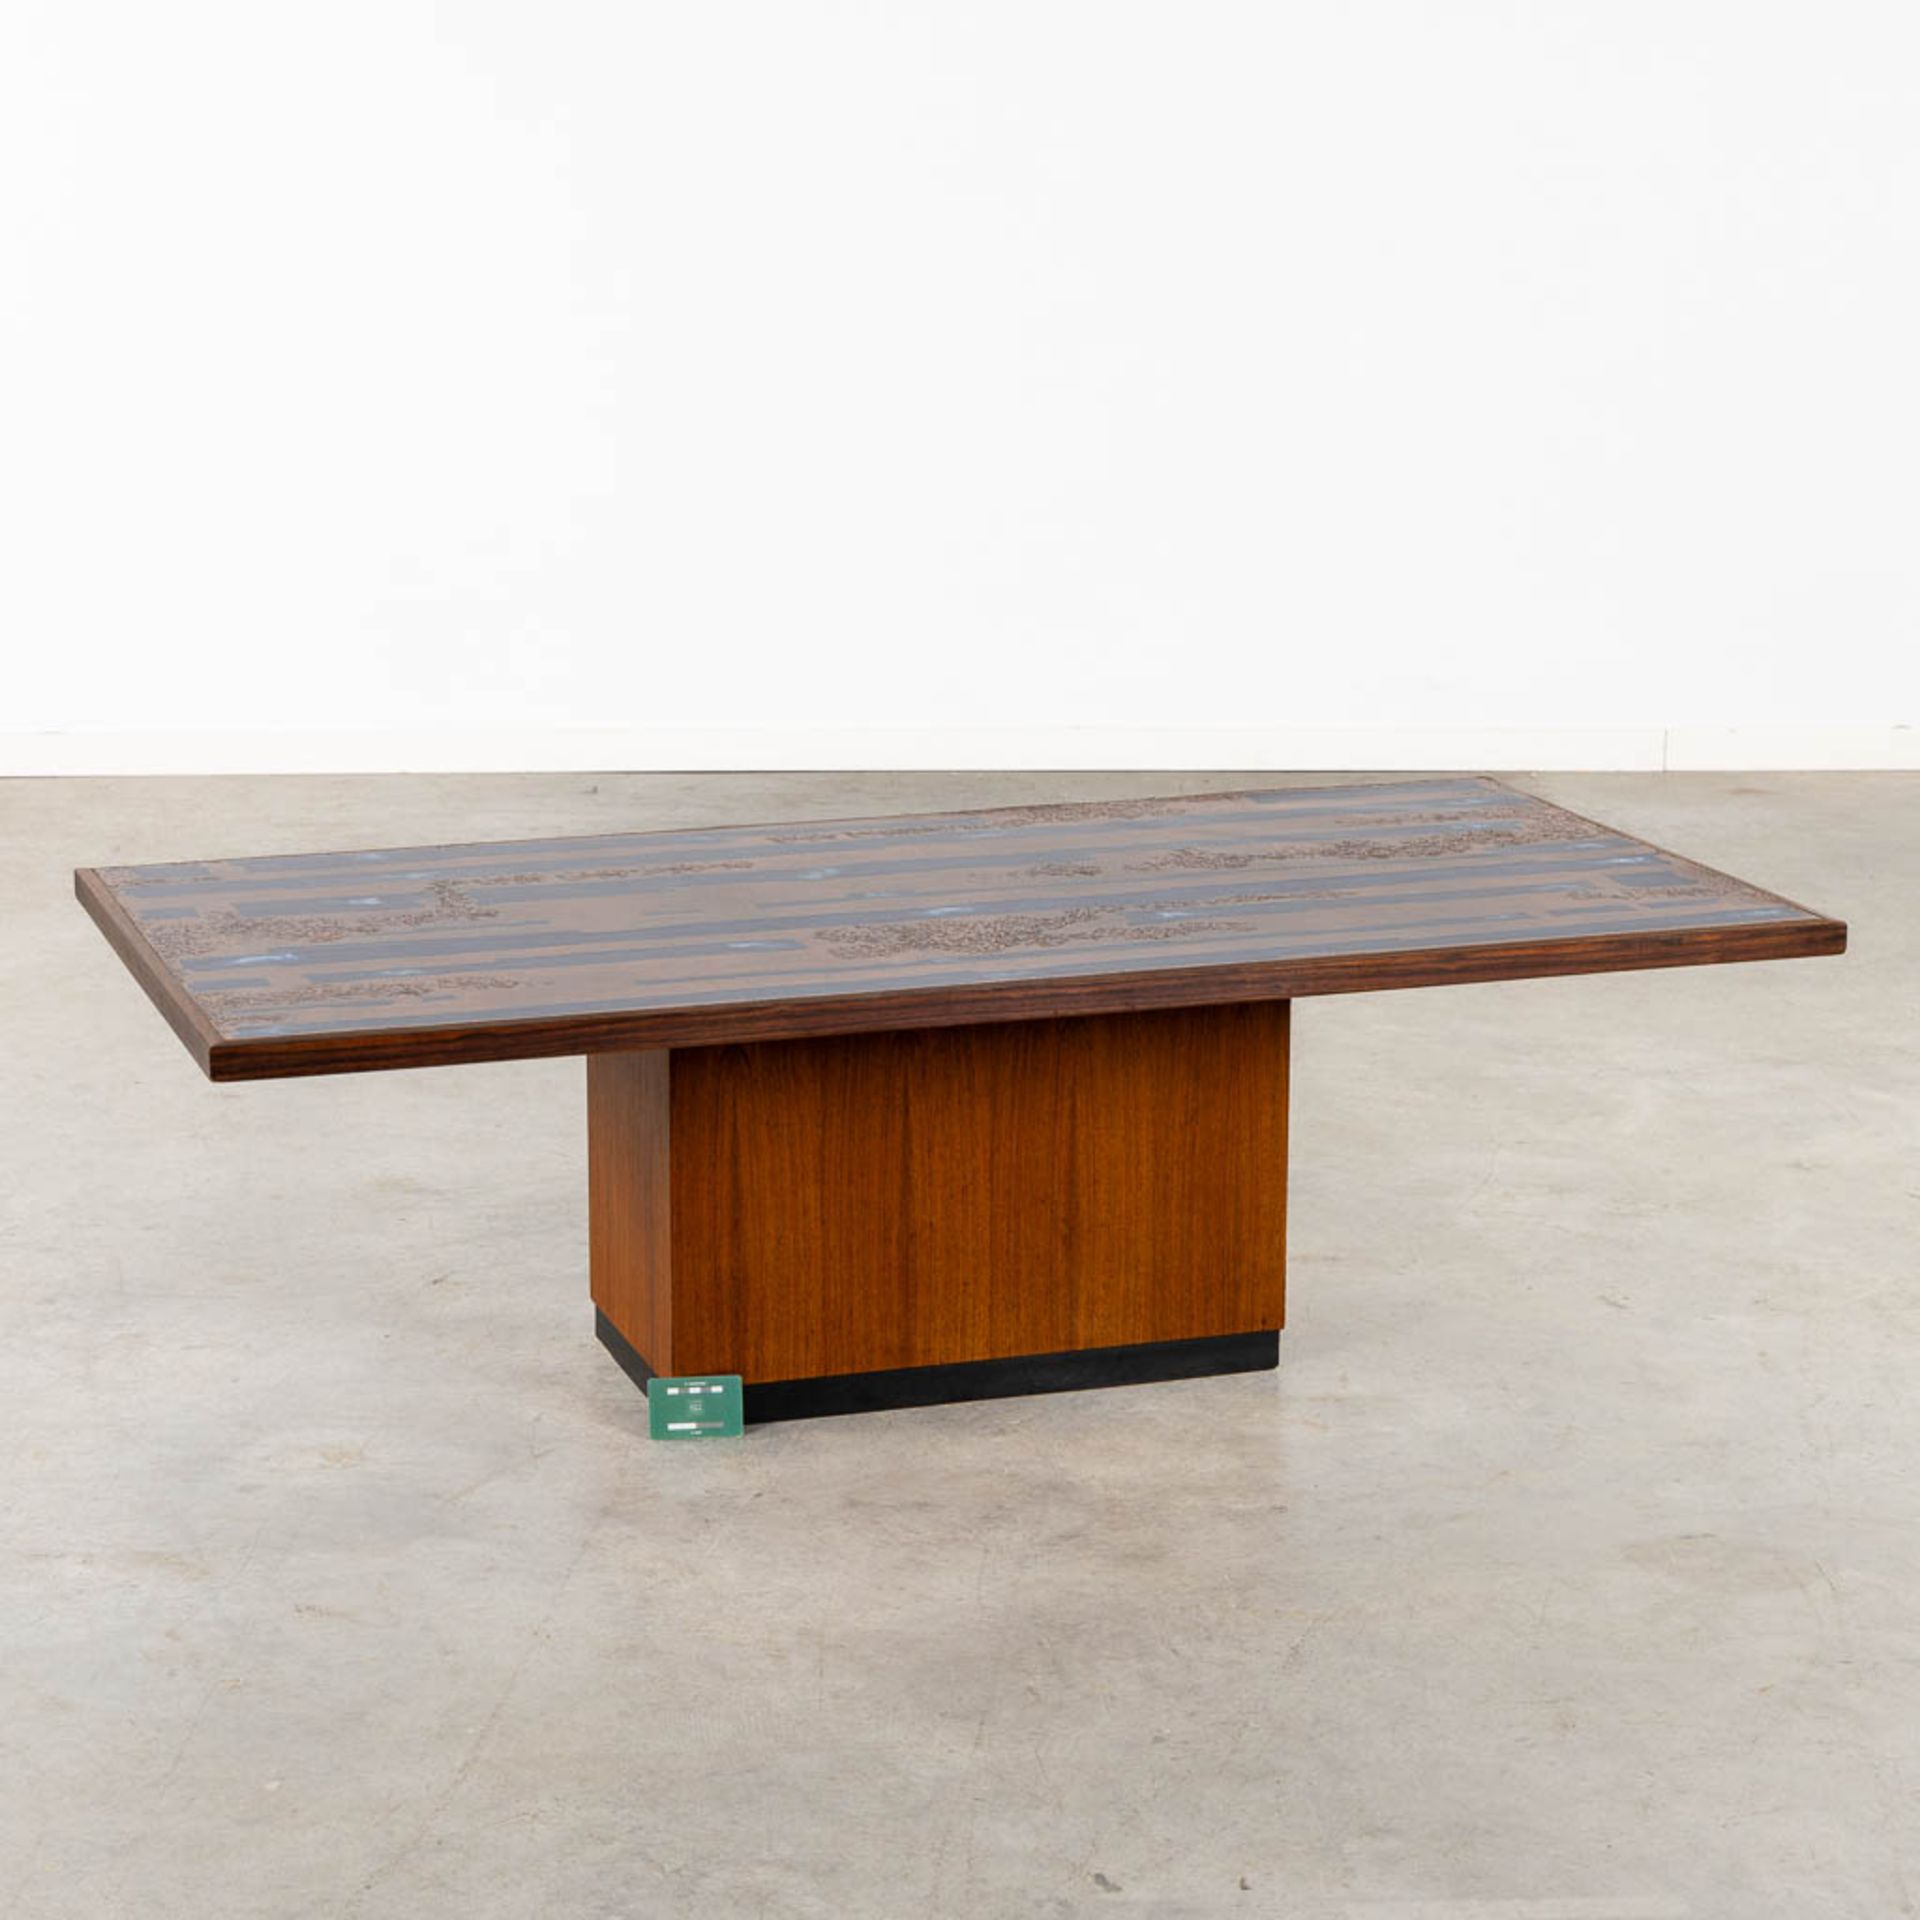 Heinz LILIENTHAL (1927-2006) 'Coffee Table' . (L:75 x W:150 x H:45 cm) - Image 2 of 10